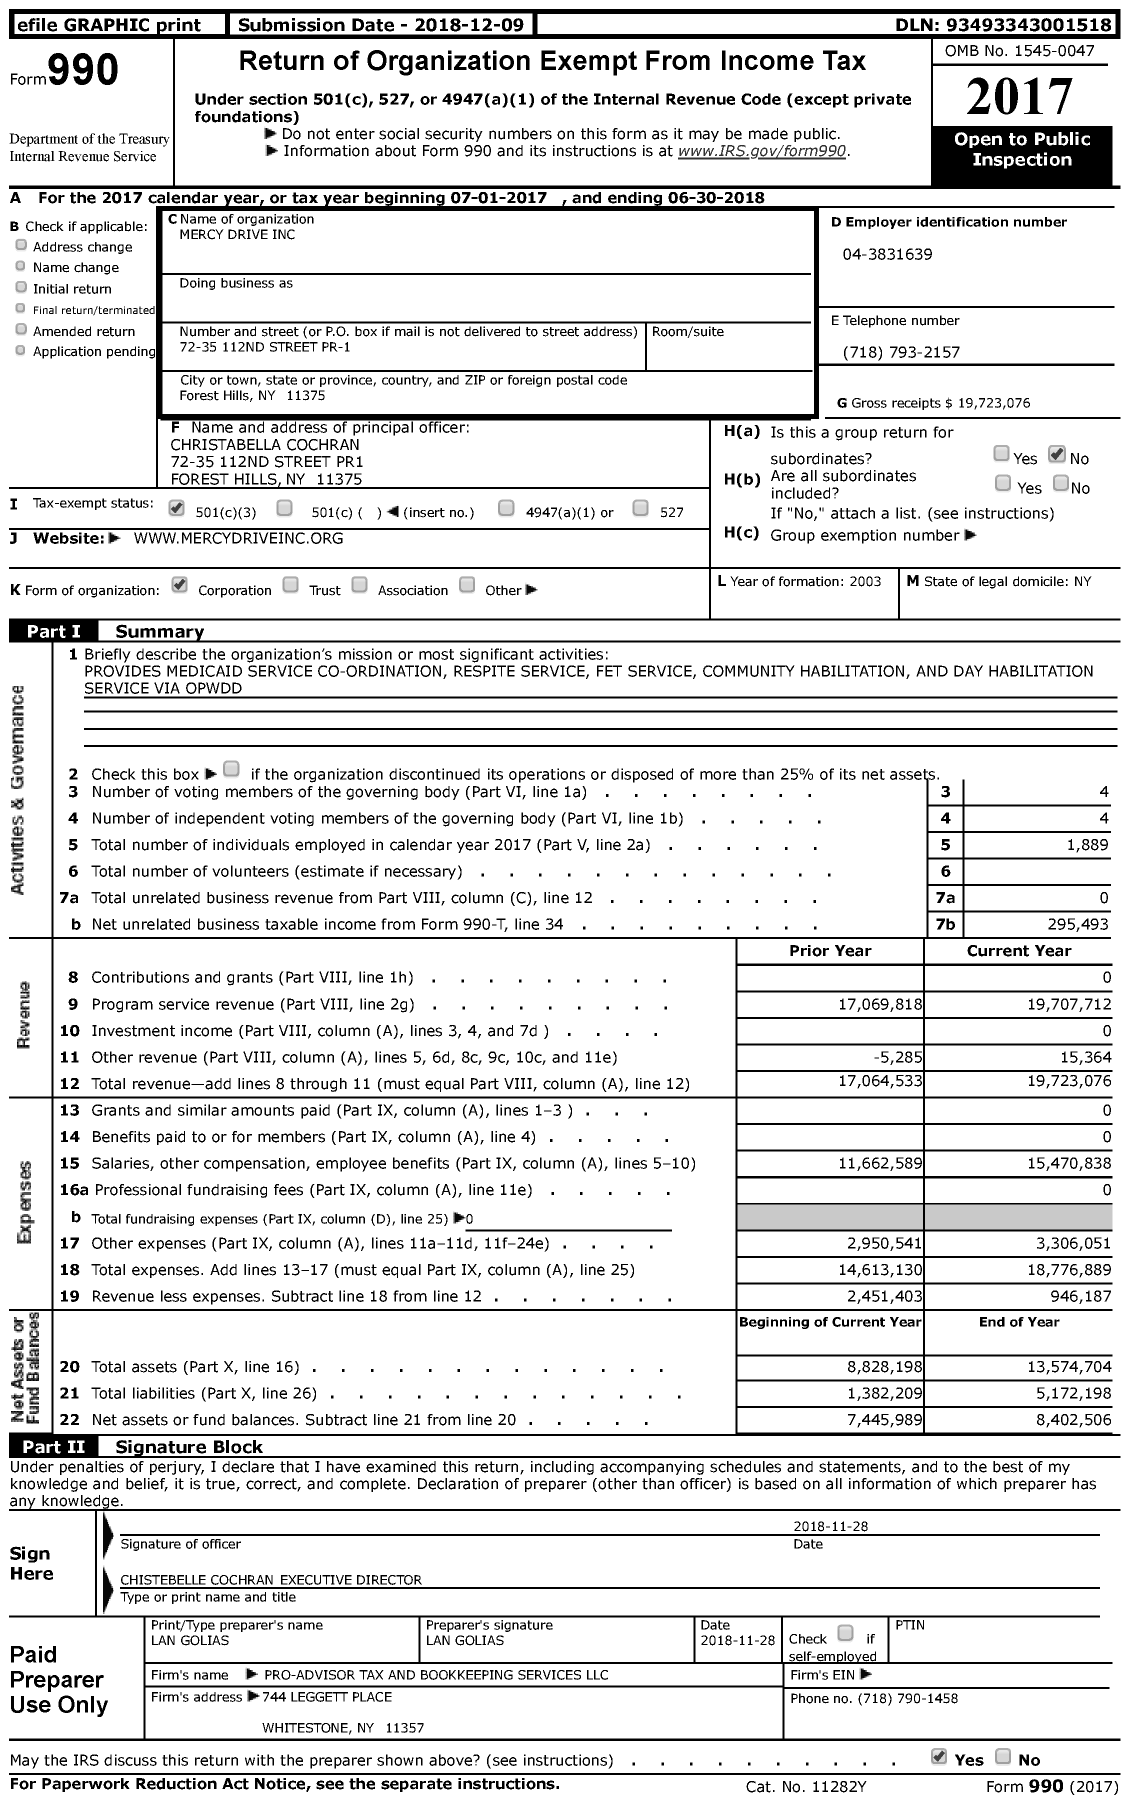 Image of first page of 2017 Form 990 for Mercy Drive (MDI)